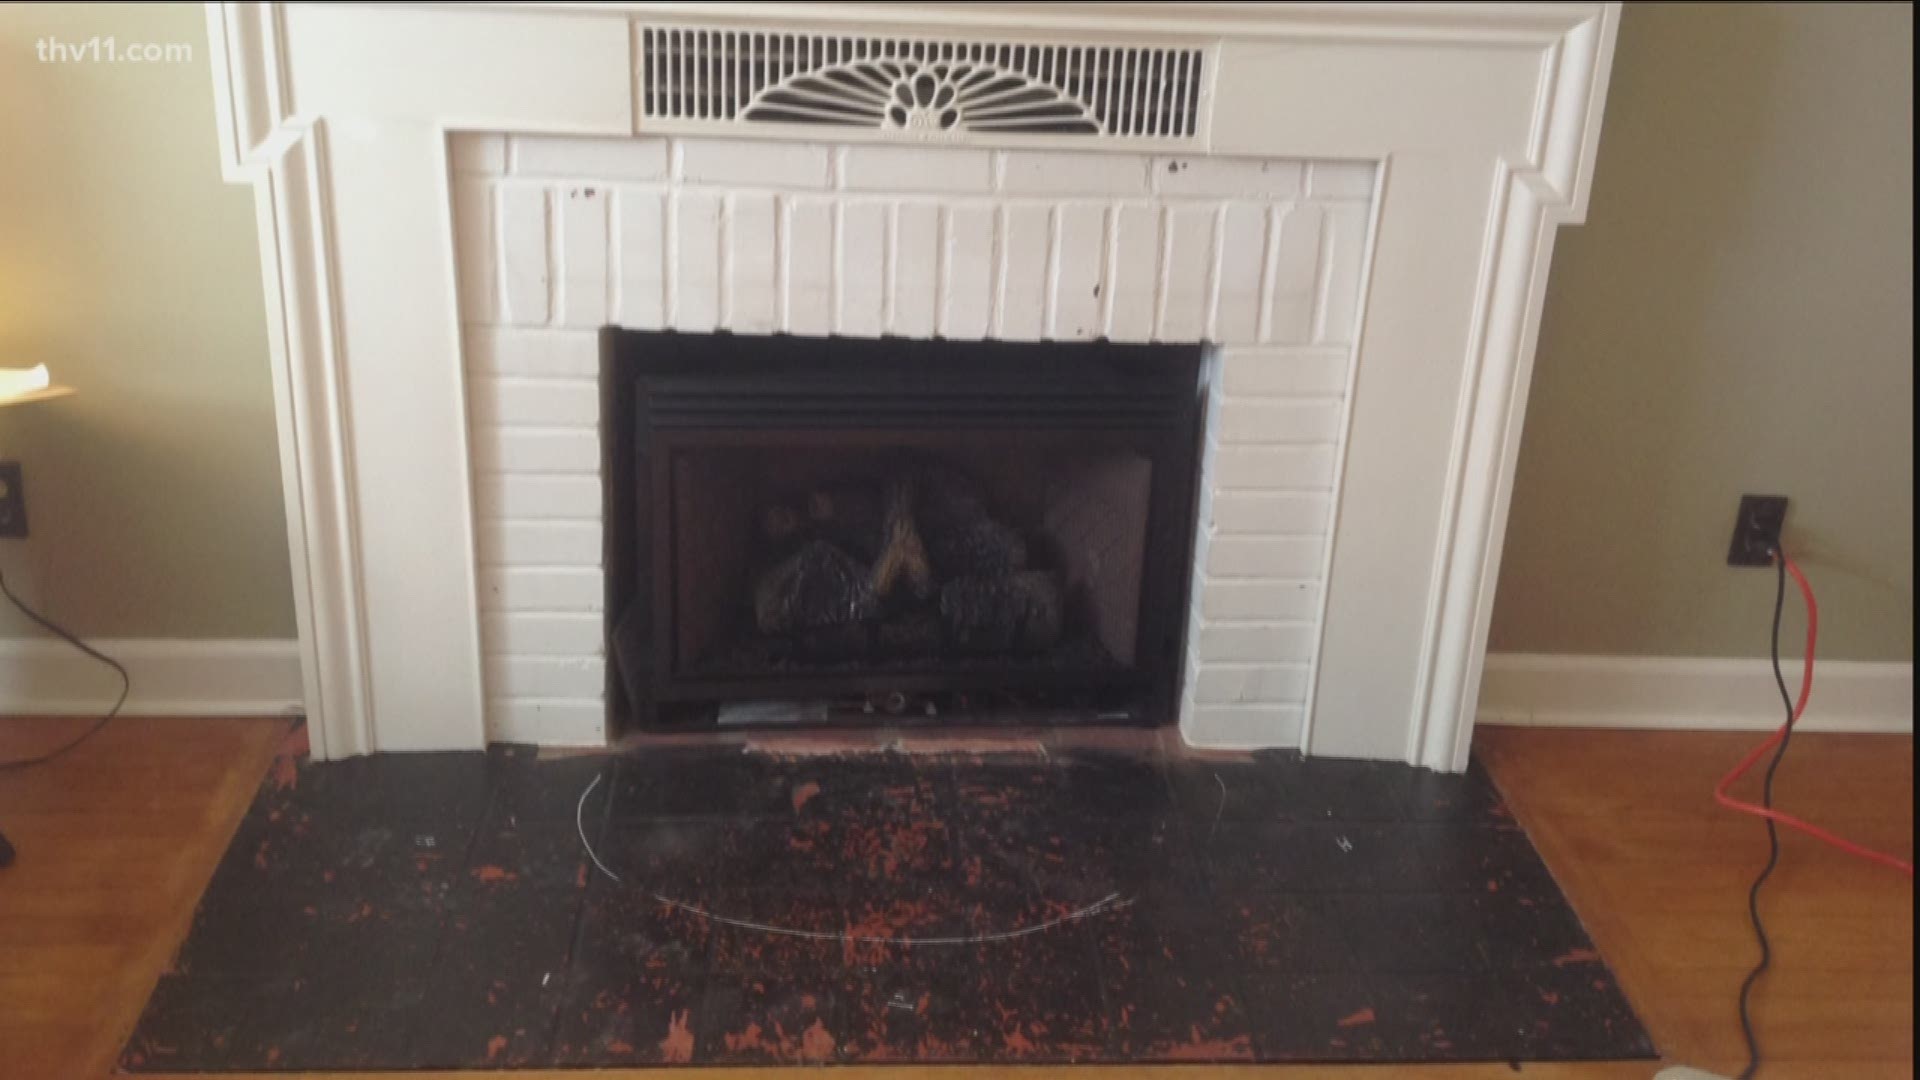 Paul Kroger from Granite Transformations is here to help redesign our fire places.